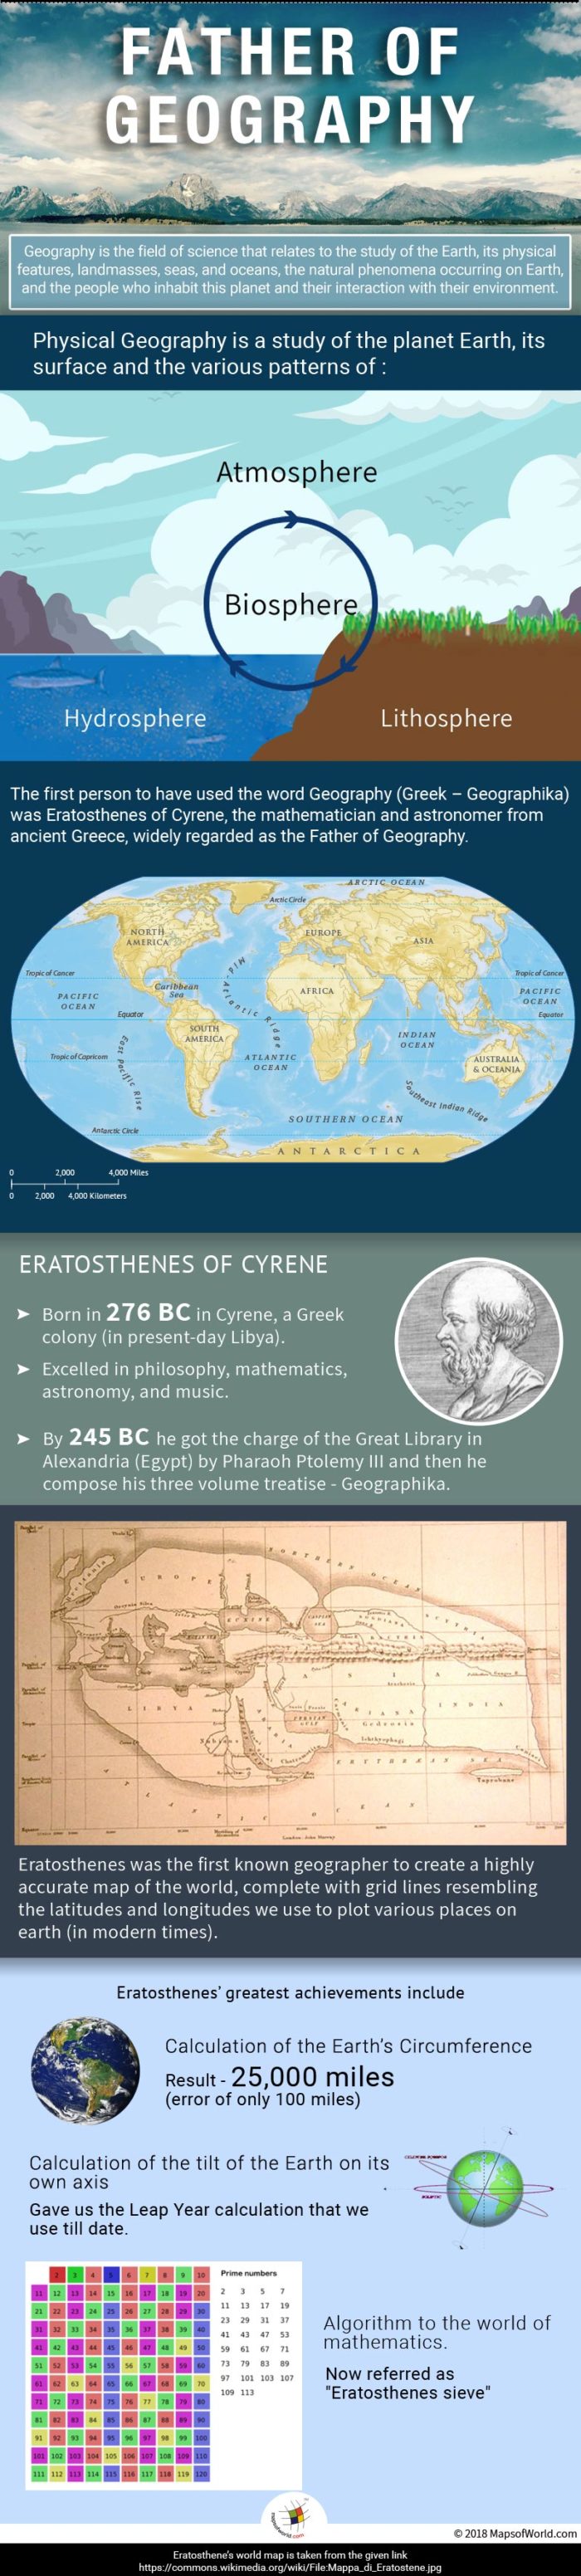 Infographic detailing the fathers of geography